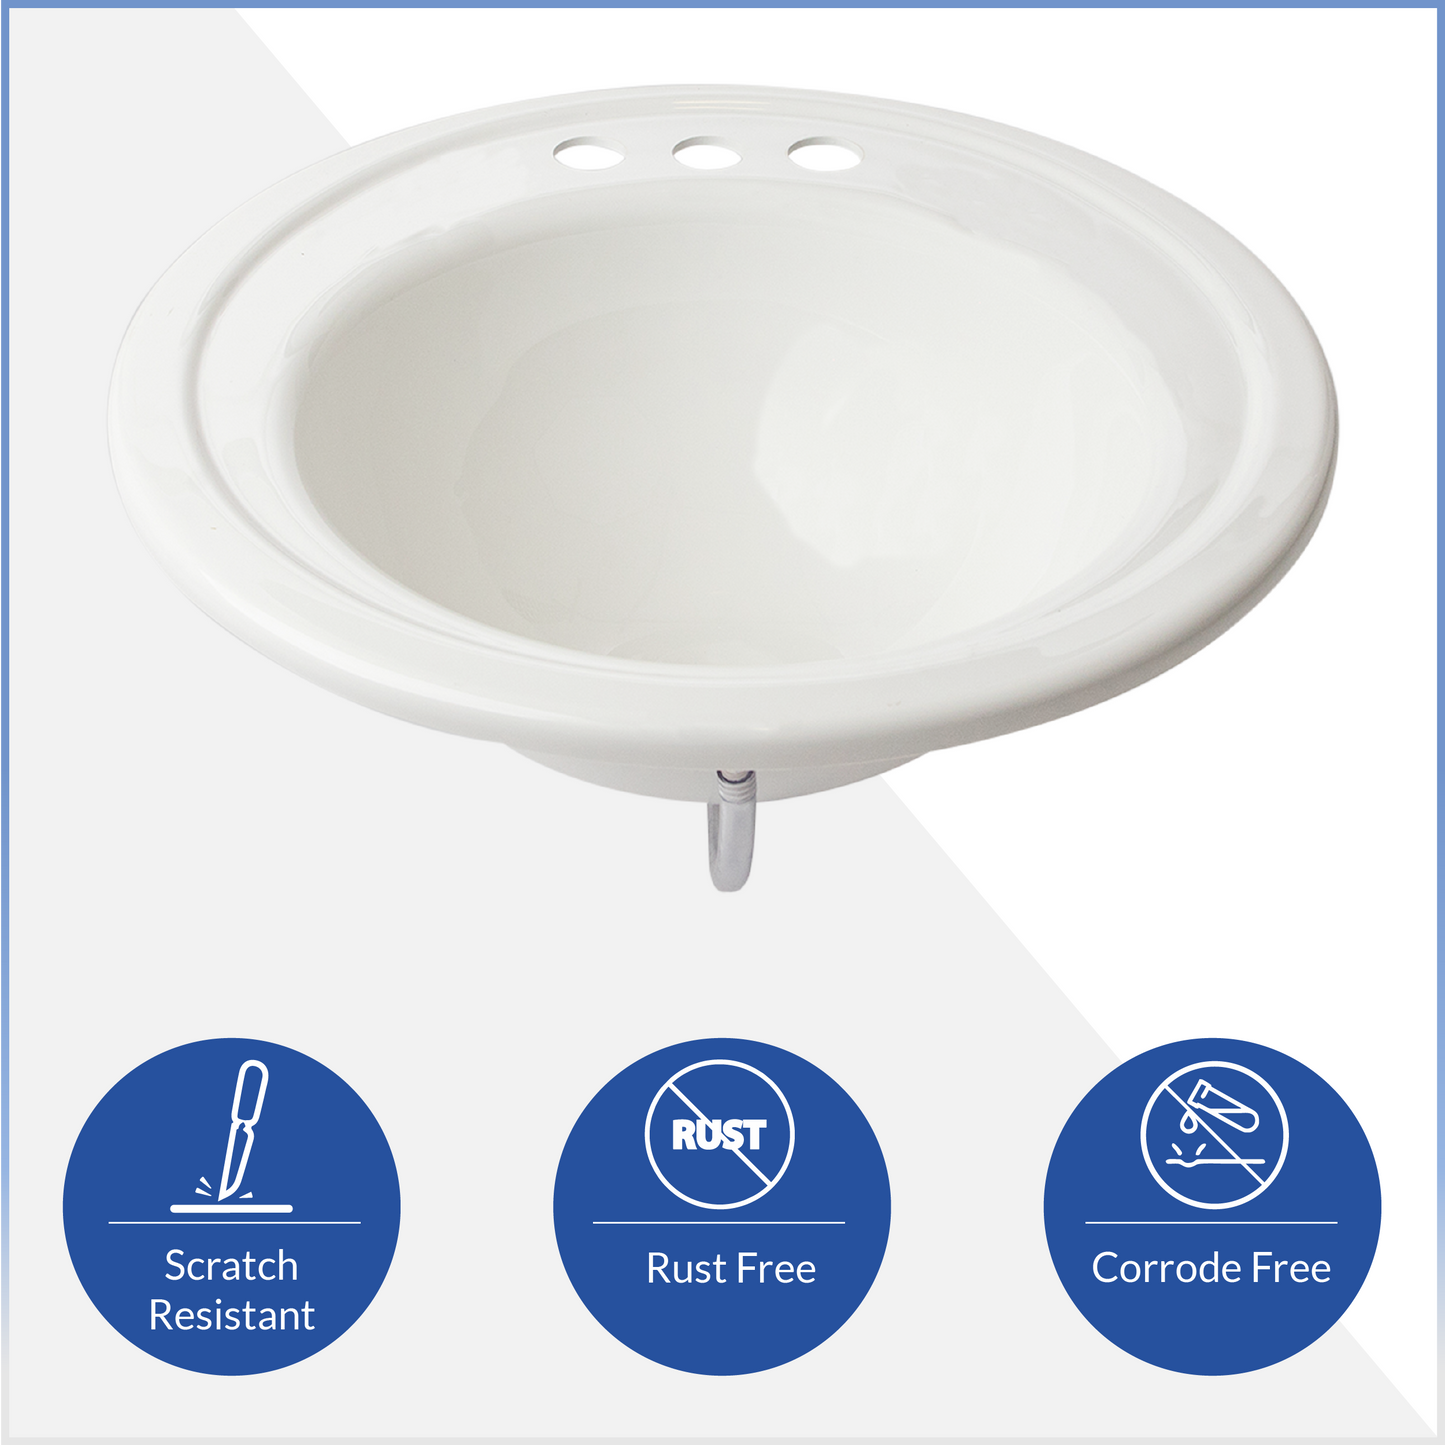 18" x 20" Round white Sink  includes mounting tabs, screws and overflow tubing